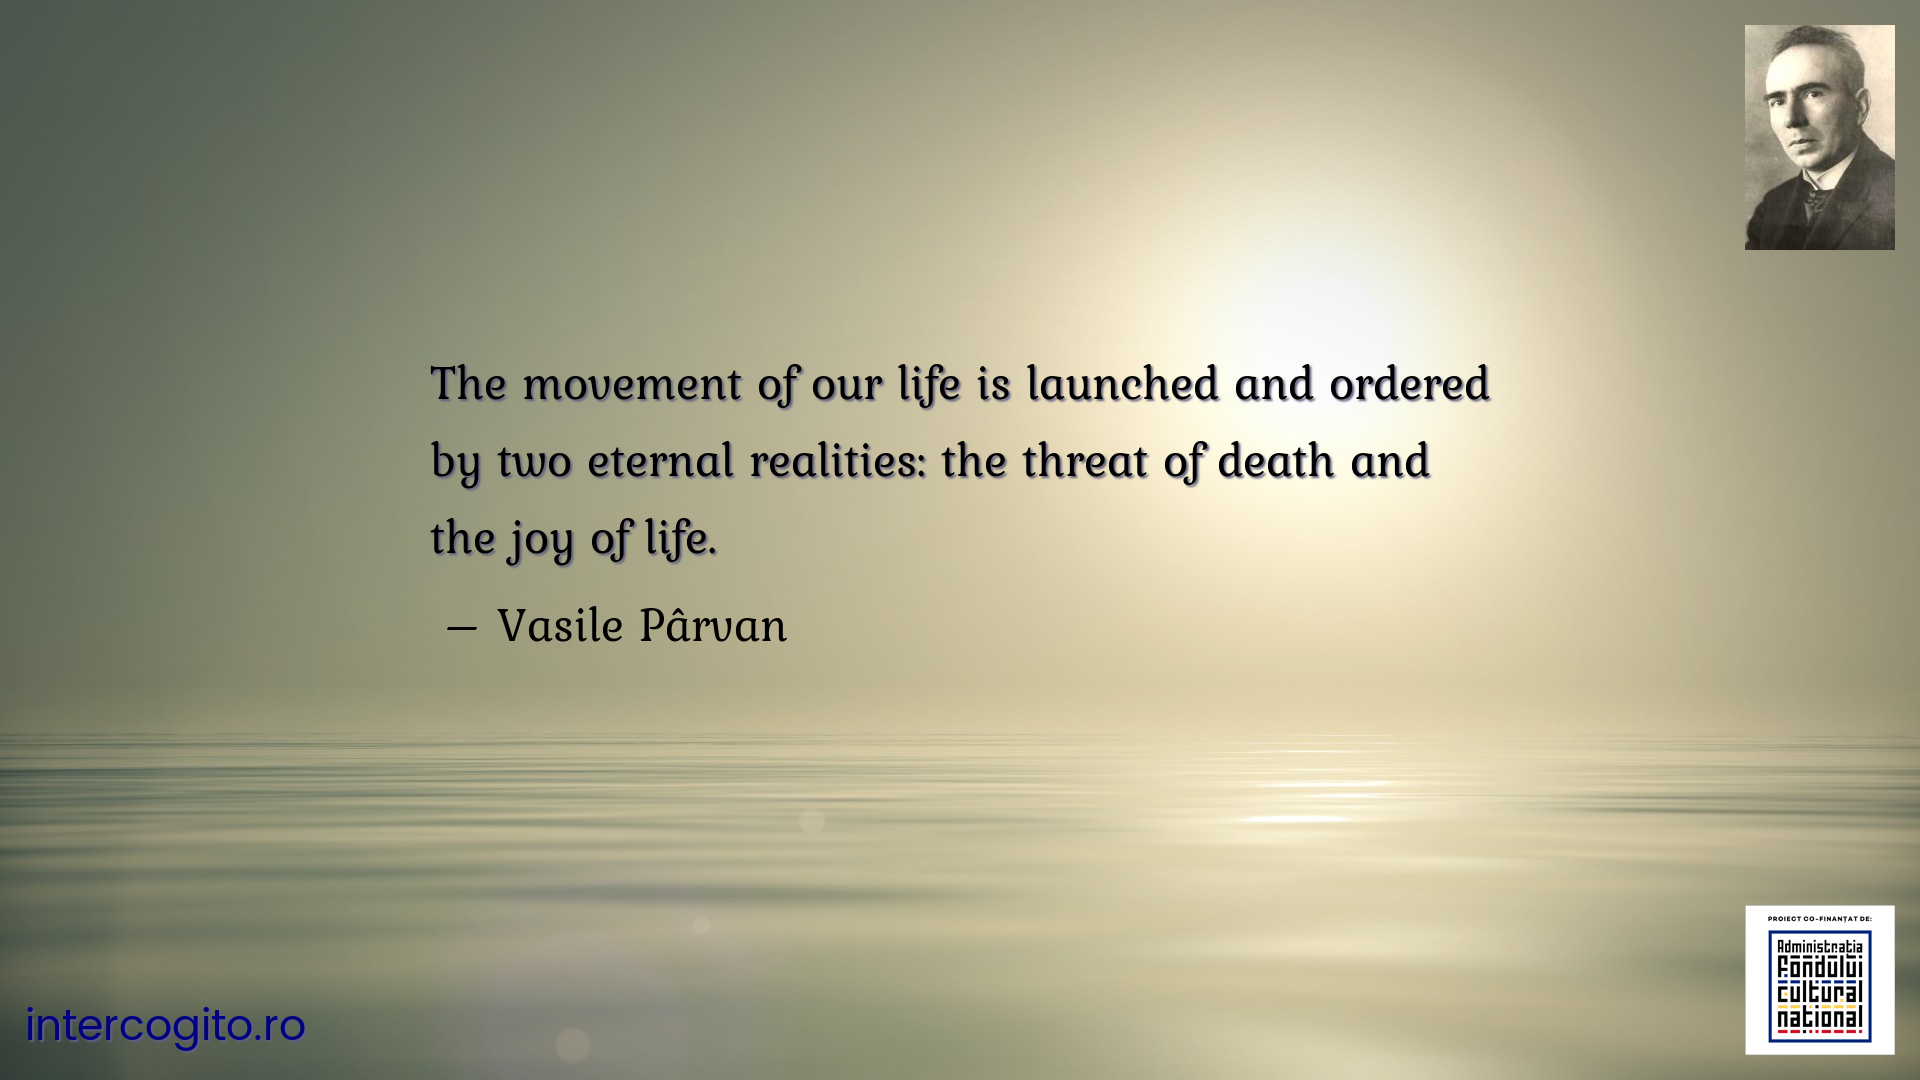 The movement of our life is launched and ordered by two eternal realities: the threat of death and the joy of life.